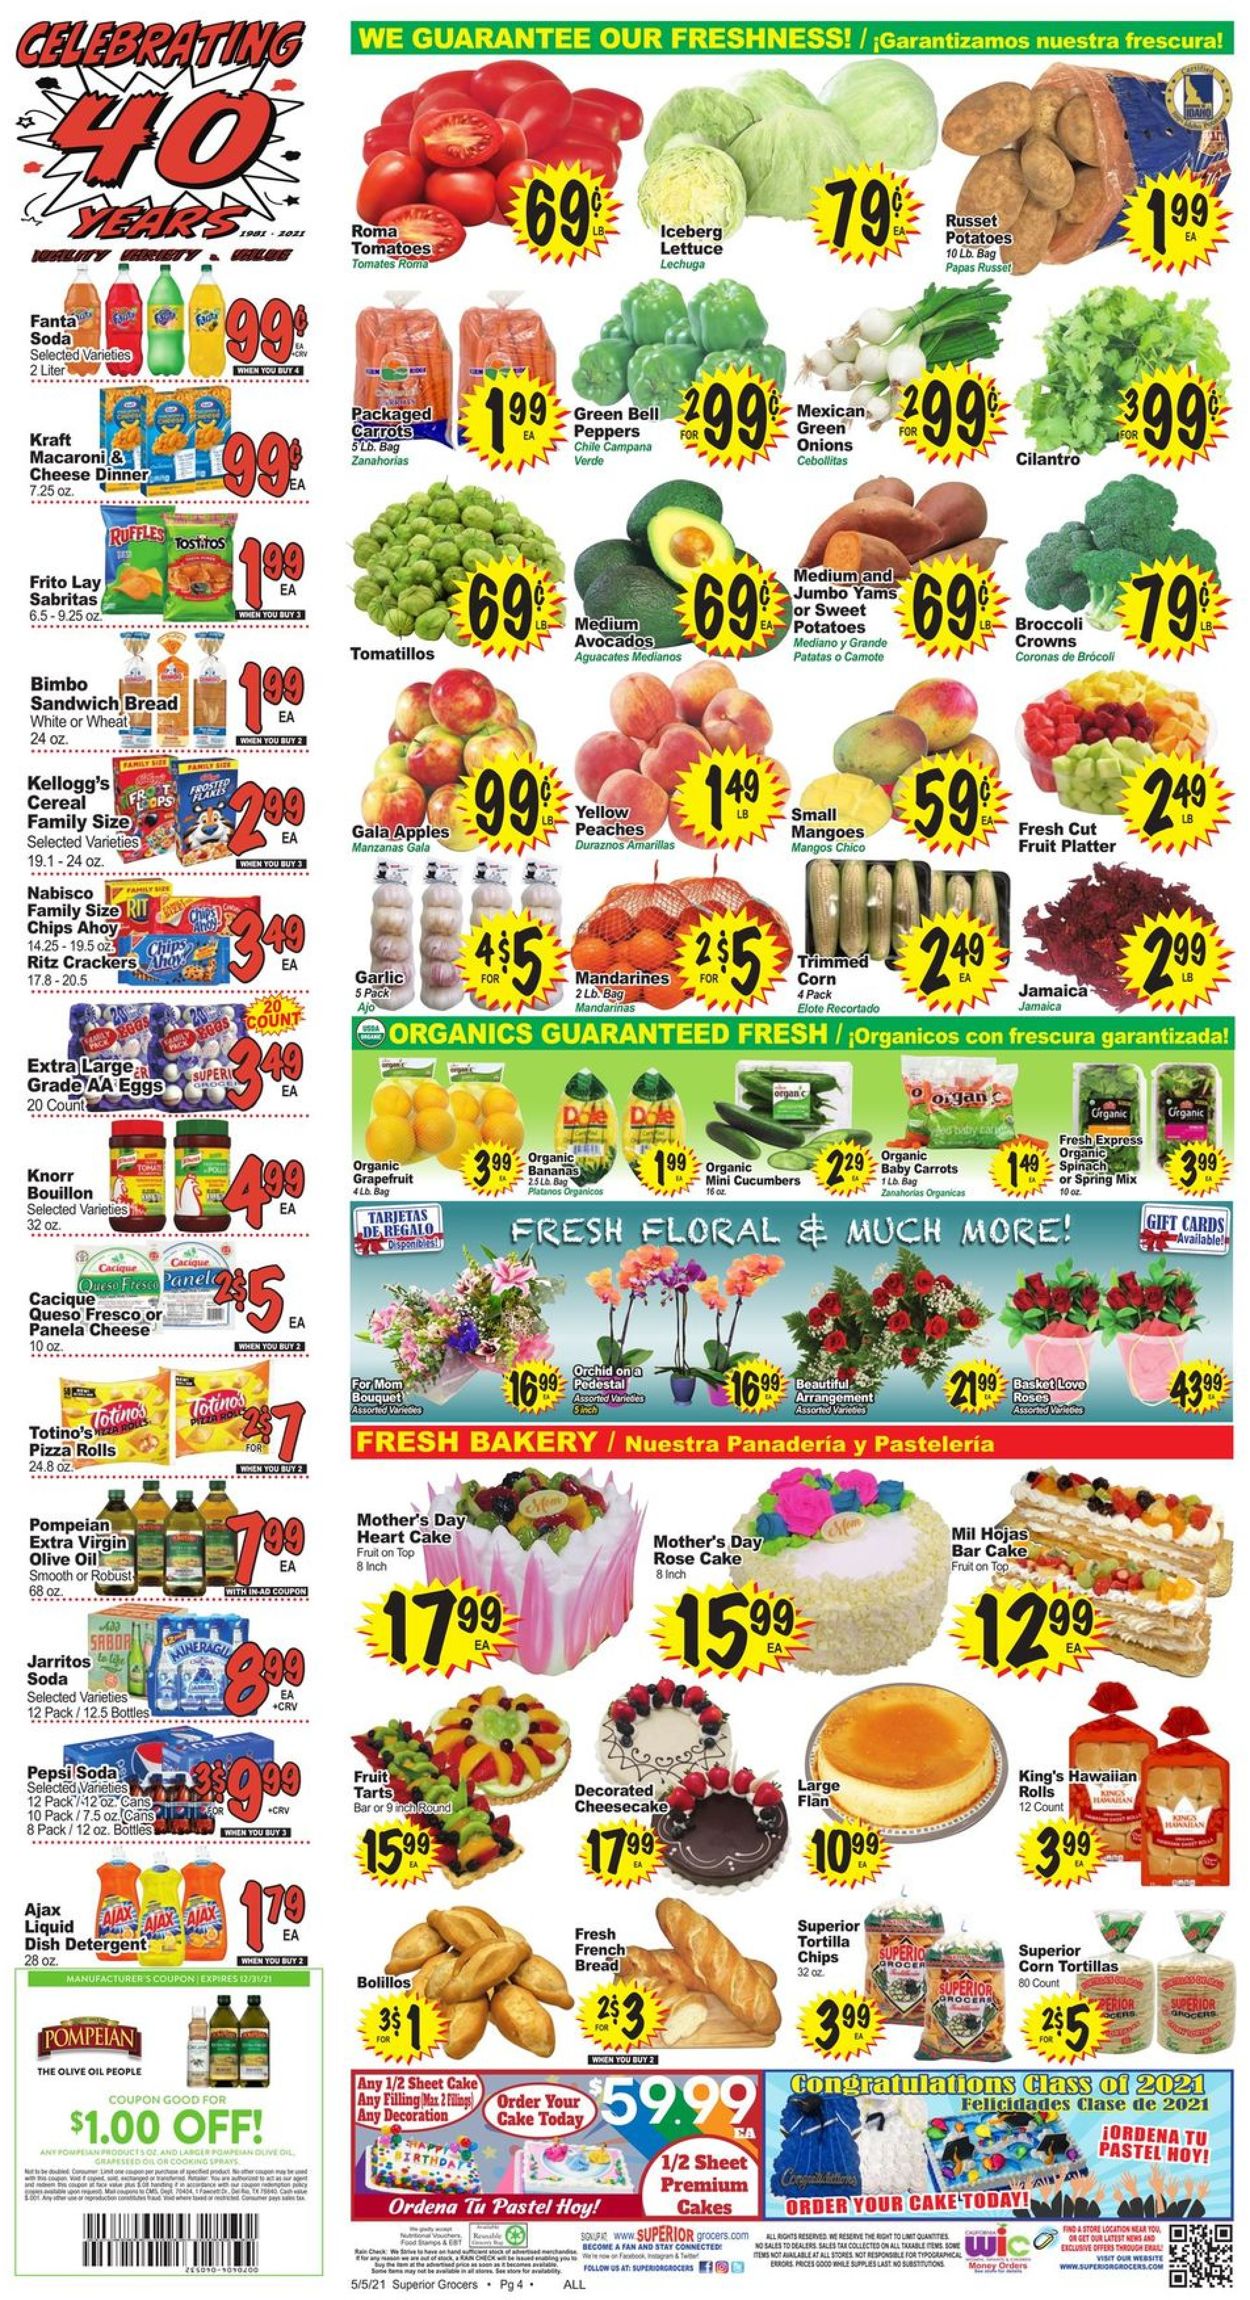 Catalogue Superior Grocers from 05/05/2021